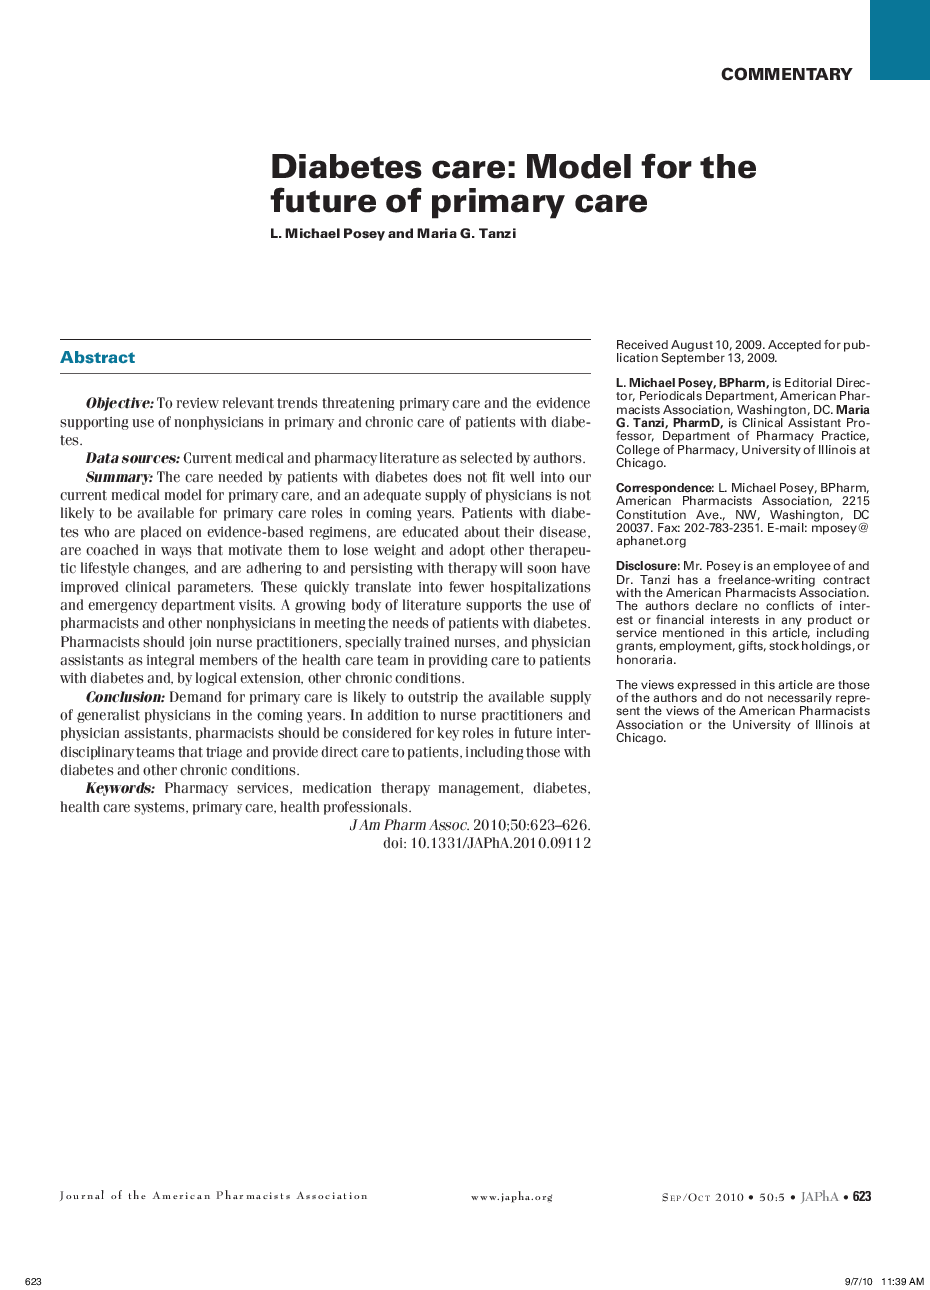 Diabetes care: Model for the future of primary care